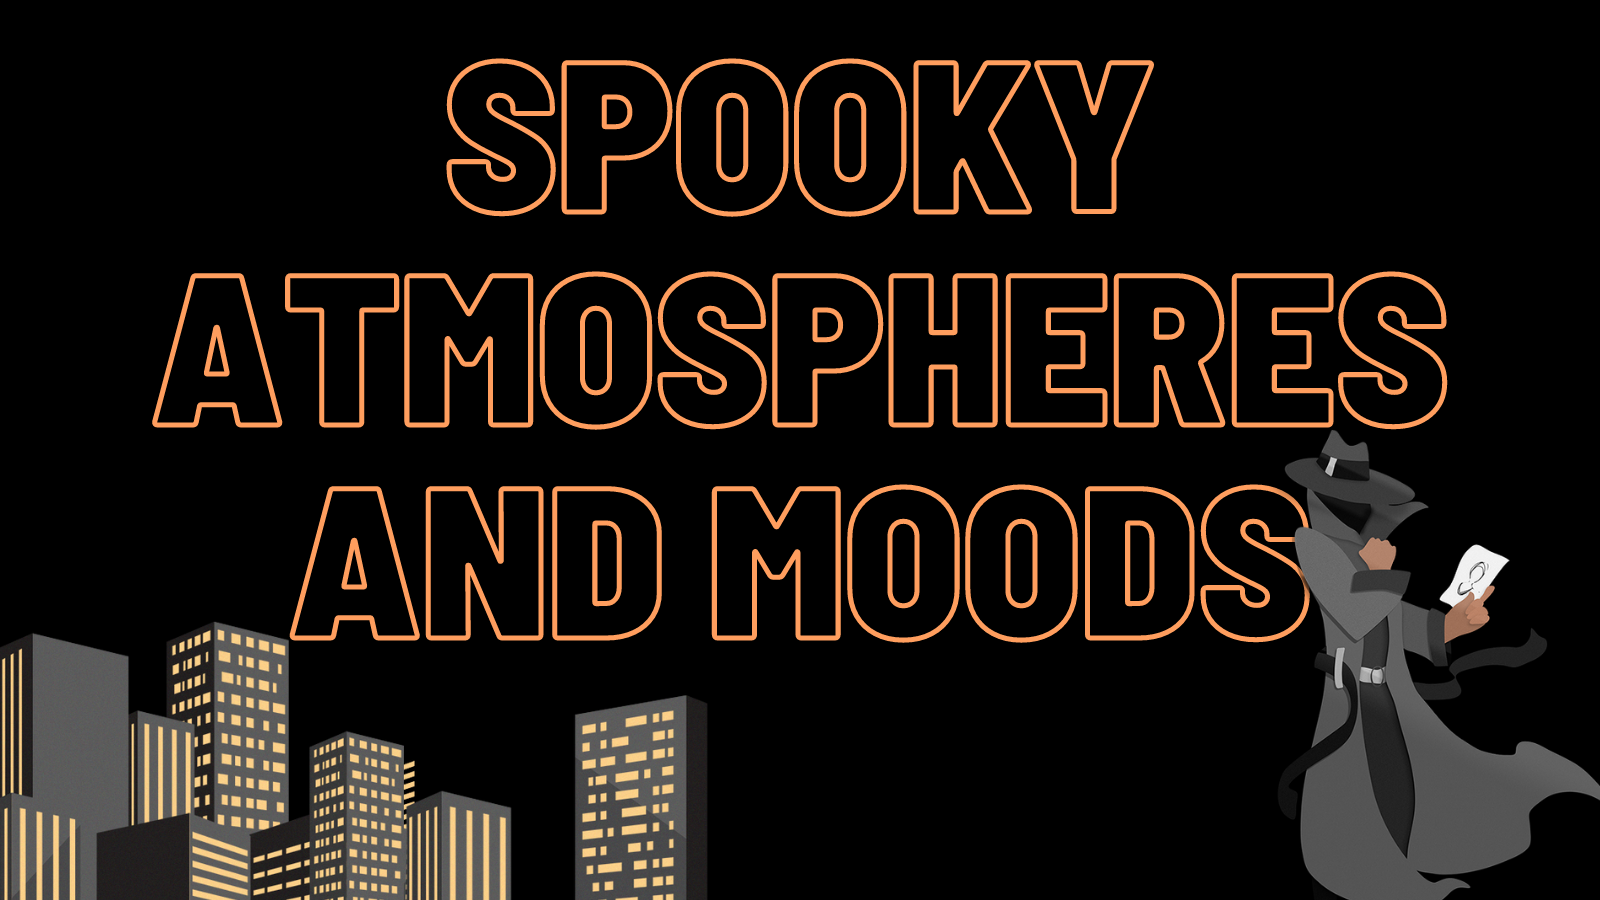 "Spooky Atmospheres and Moods"